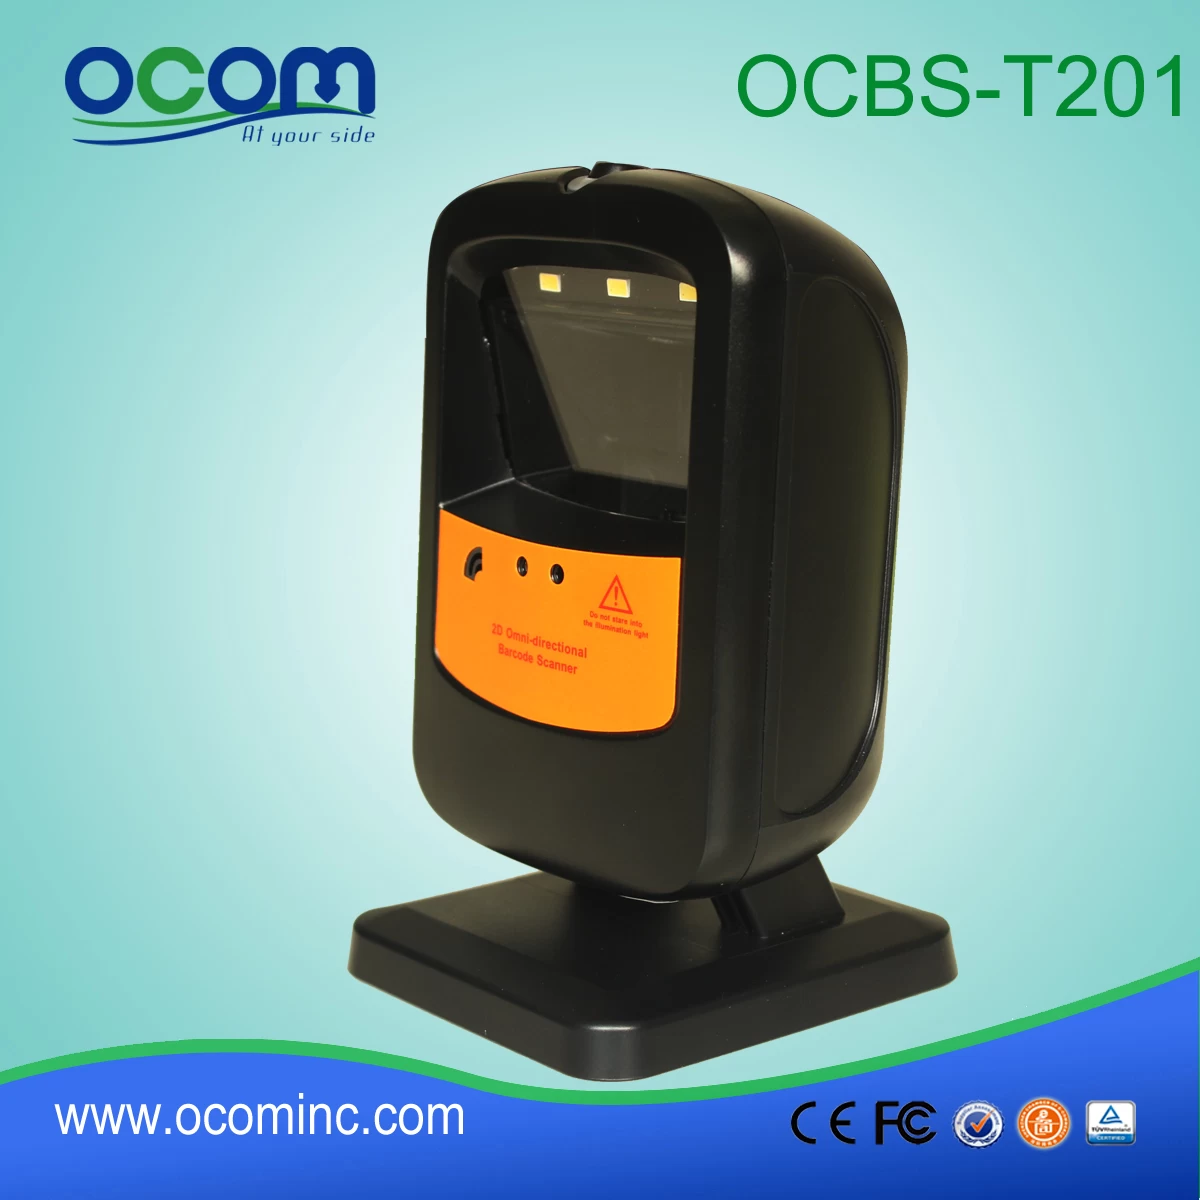 OCBS-T201:china barcode scanner rs232, cheap barcode scanner